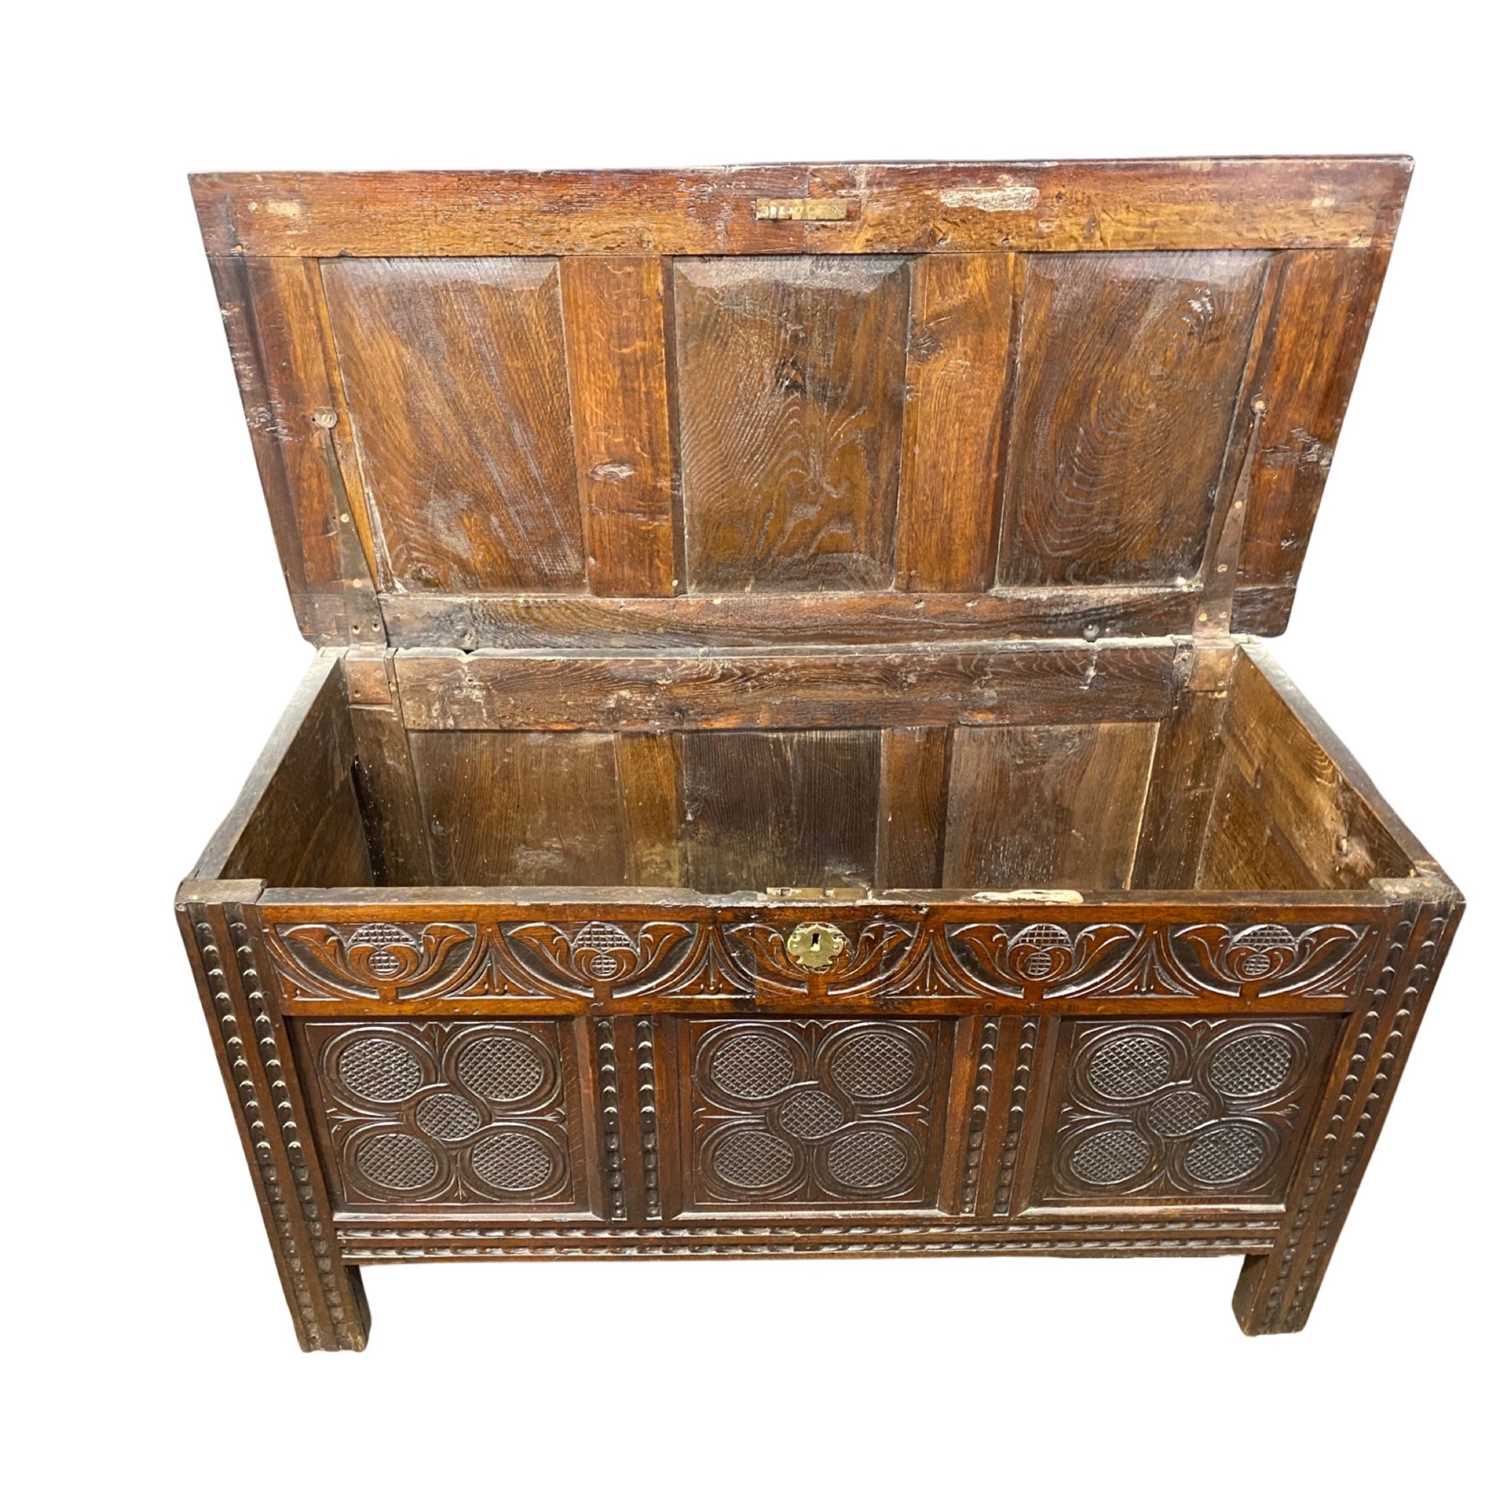 18th Century oak coffer with panelled lid over a carved three panelled front raised on style feet, - Image 3 of 4